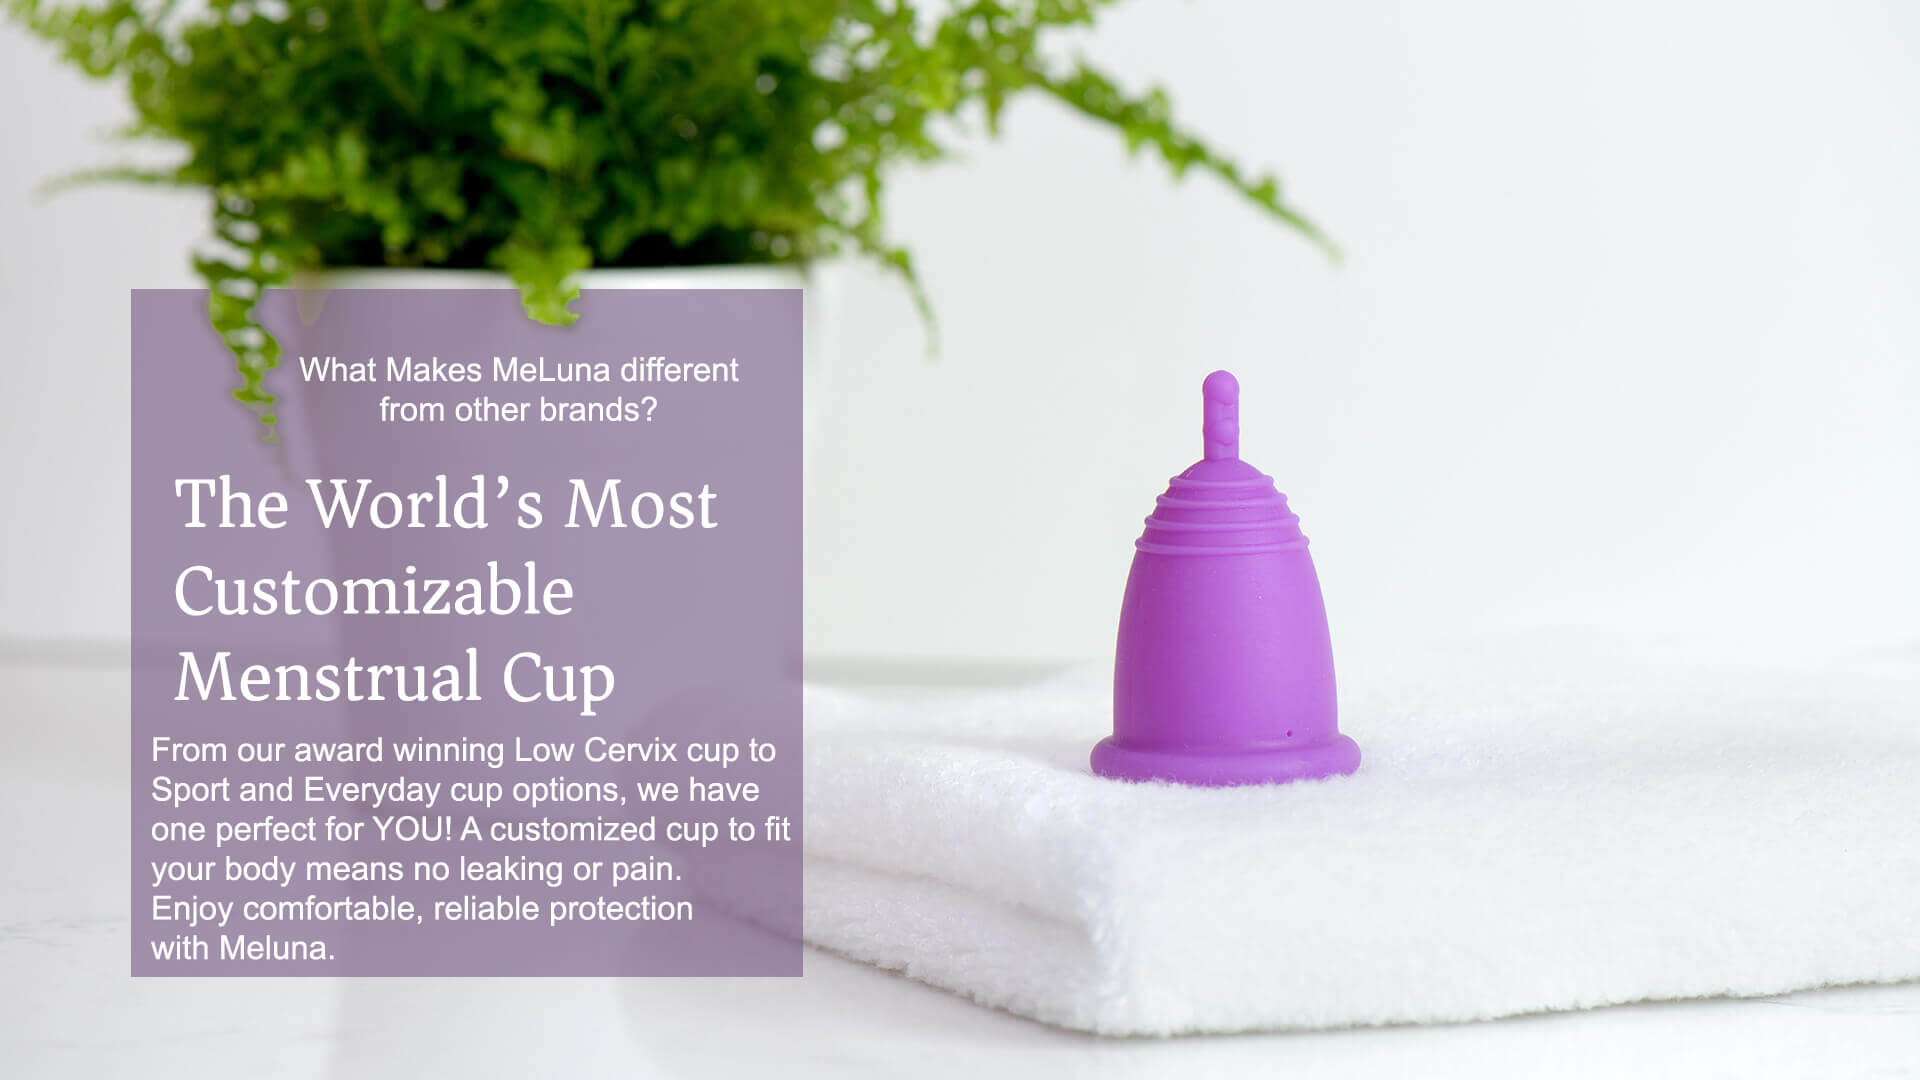 image of best menstrual cup with text: the world's most customizable menstrual cup. From our award winning Low Cervix cup to Sport and Everyday cup options, we have one perfect for YOU! A customized cup to fit your body means no leaking or pain. Enjoy comfortable, reliable protection with Meluna.